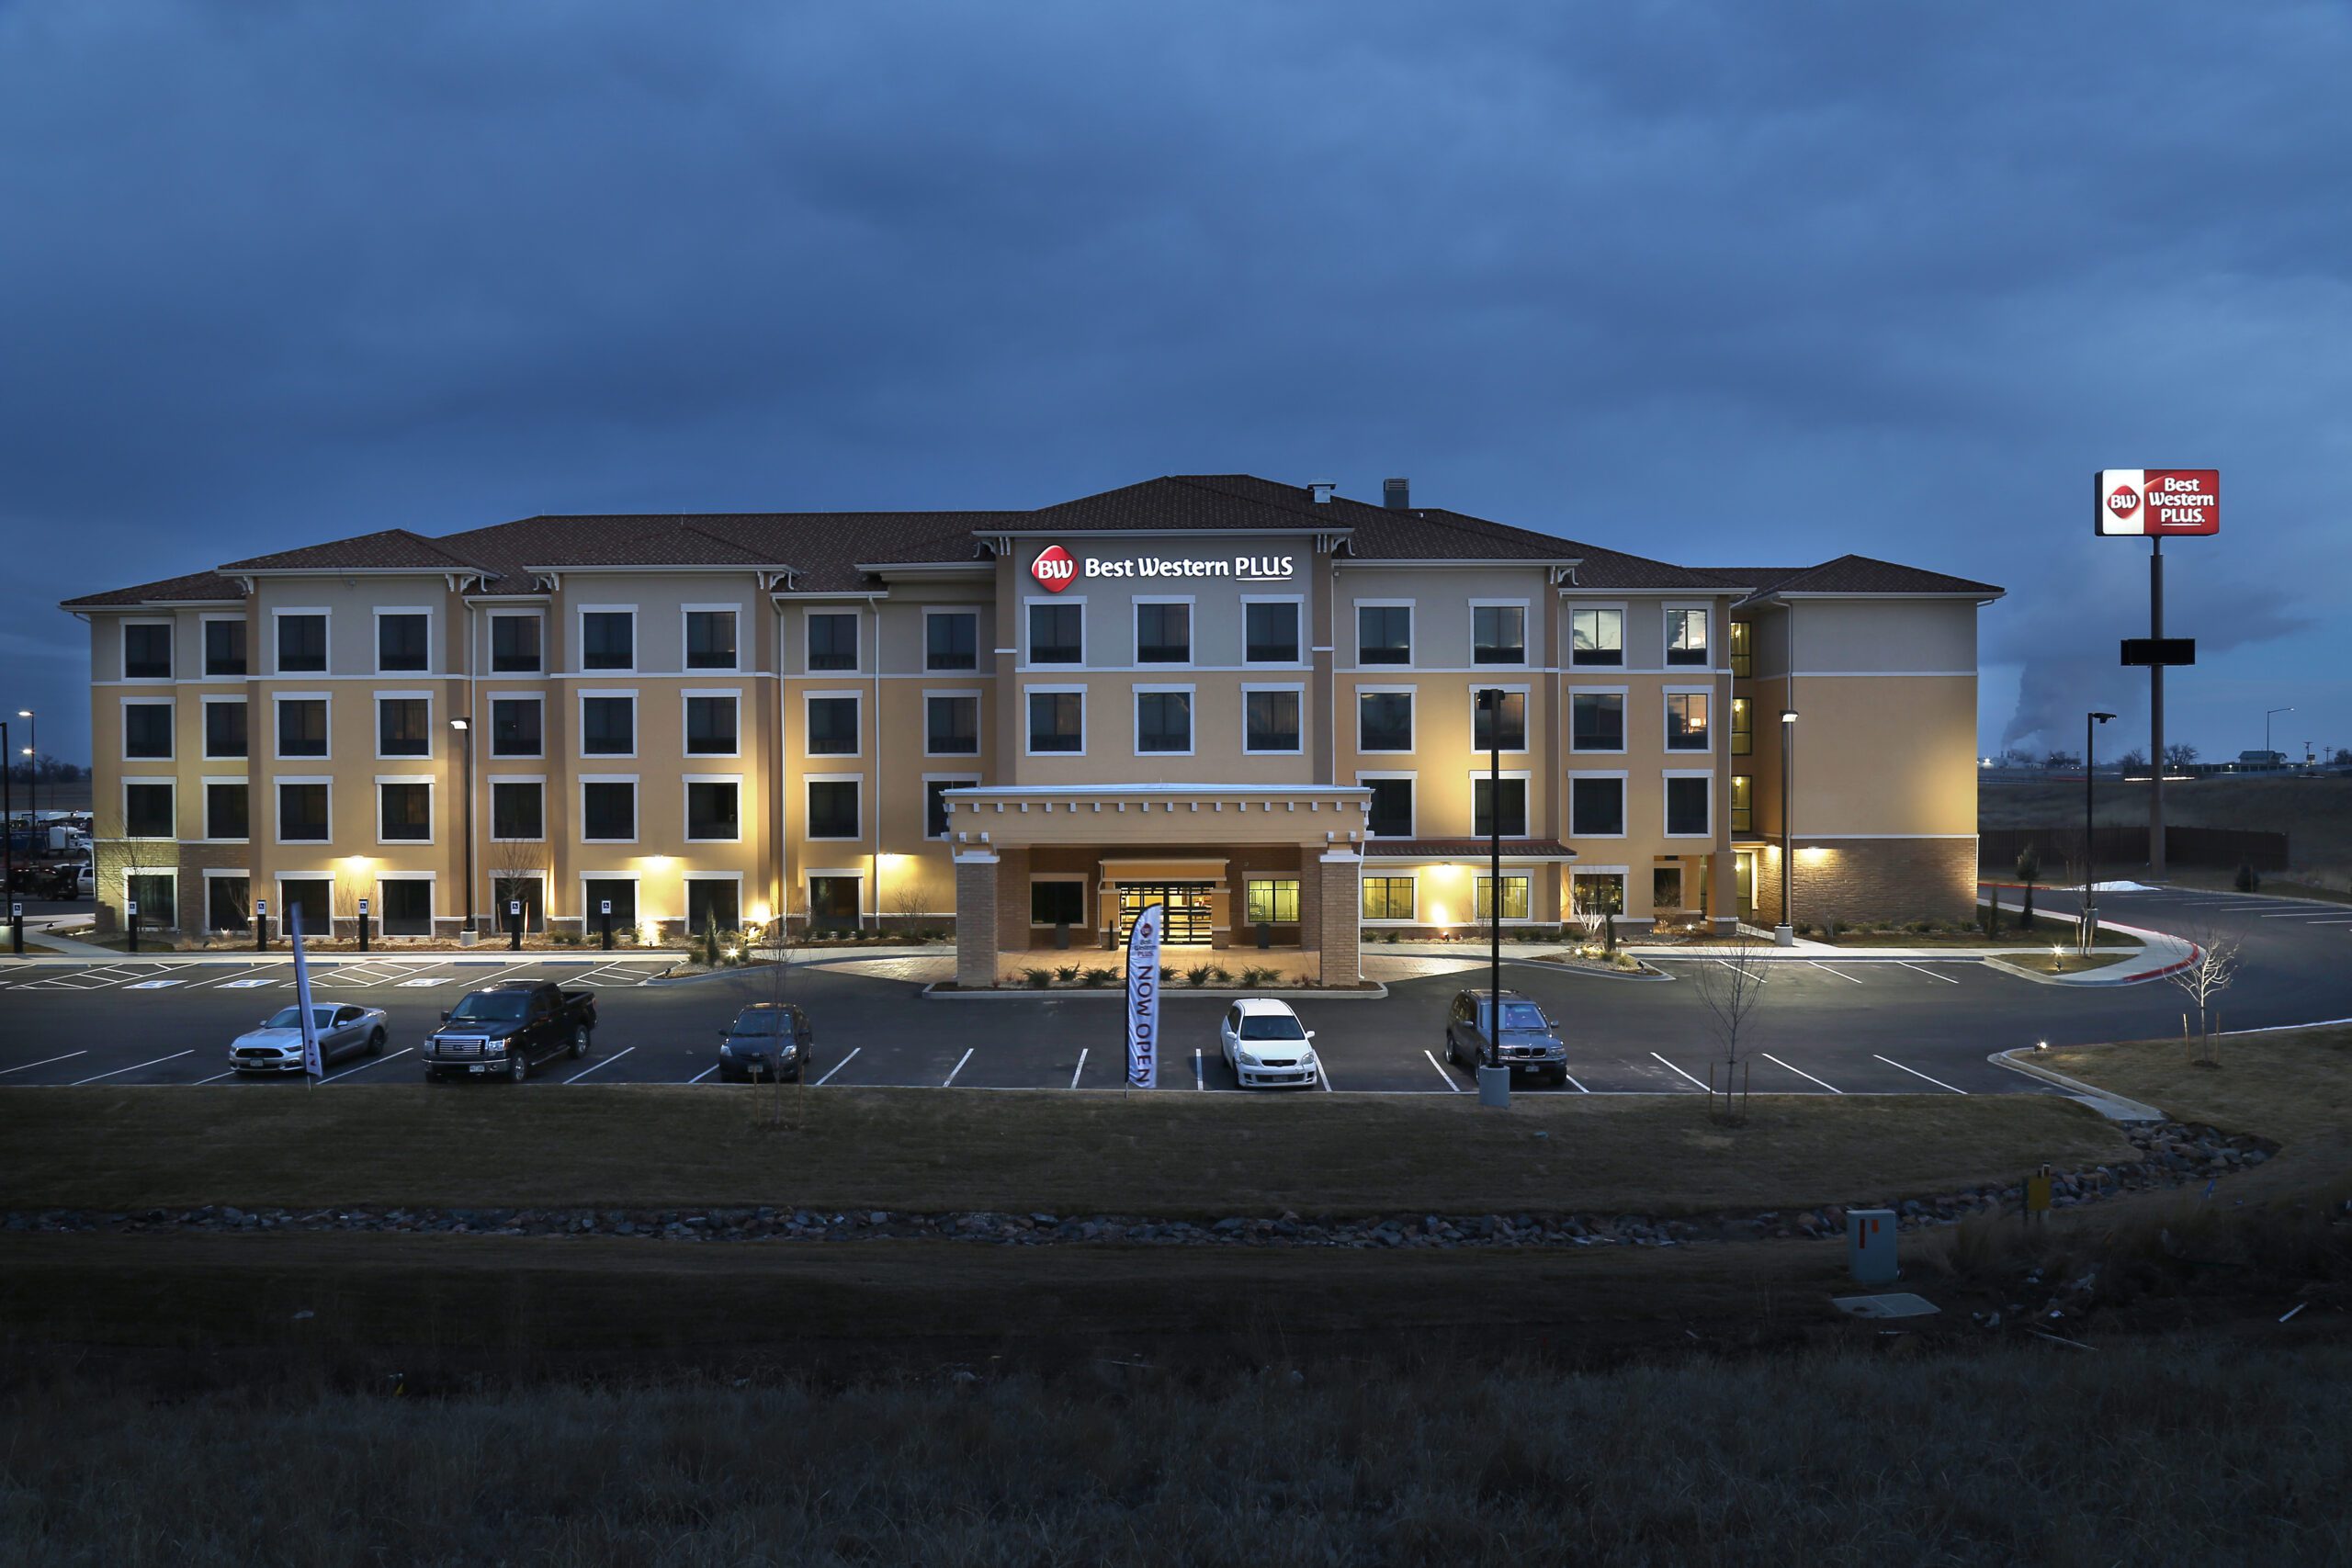 Exterior of Best Western in Hudson, CO.